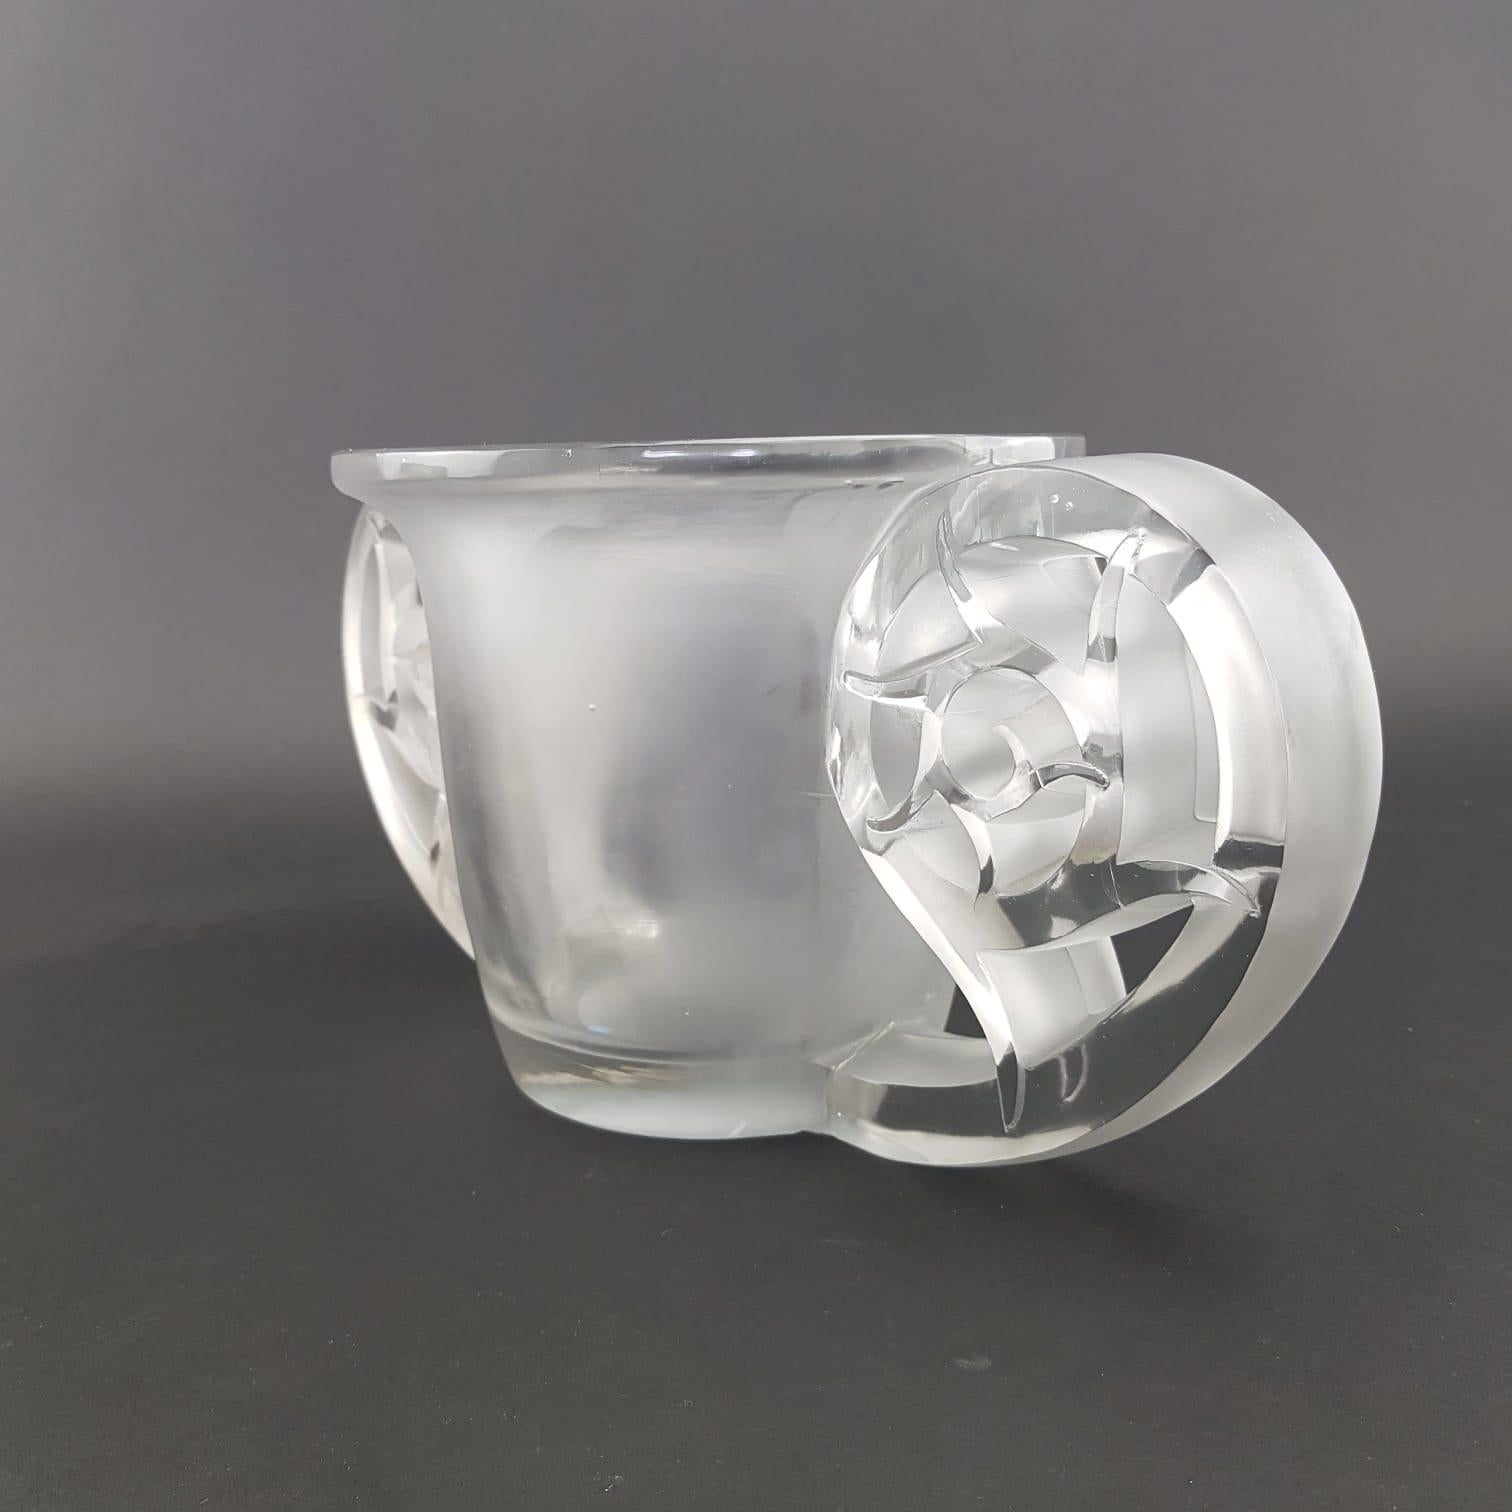 Art Deco 1926 Rene Lalique Pierrefonds Vase in Clear and Acid Satin Finish Glass